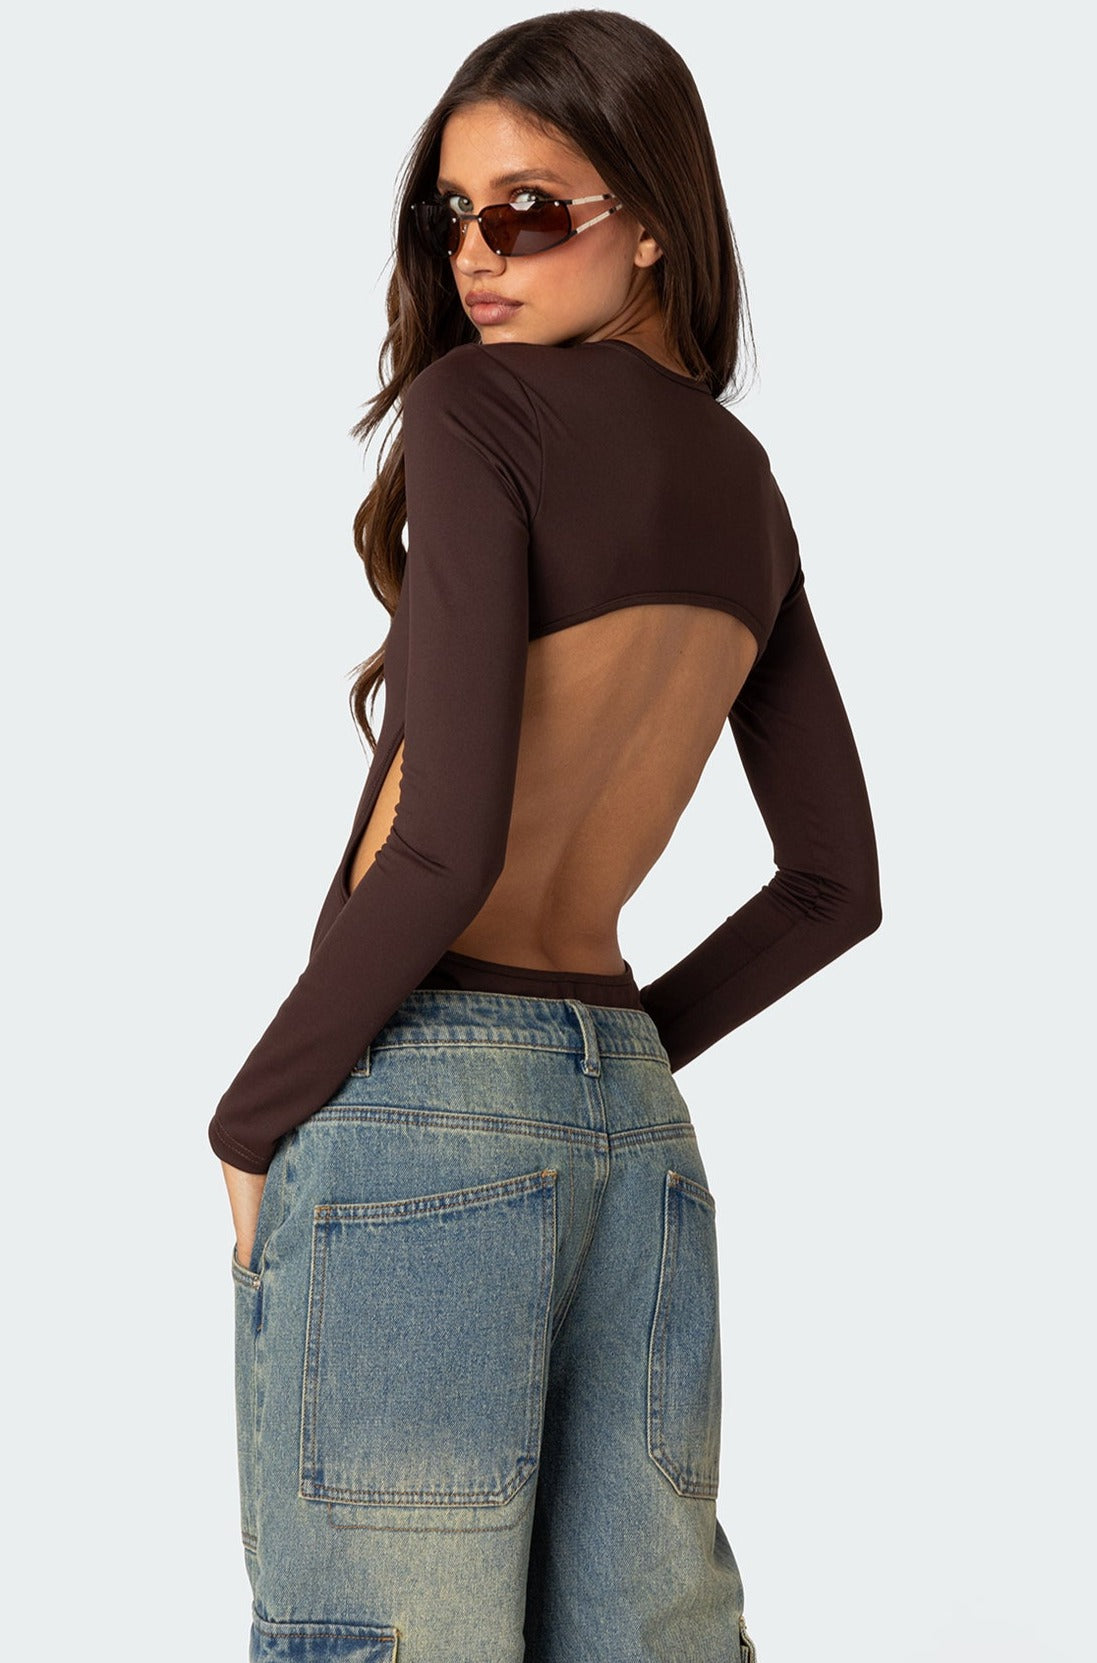 Brown 'The Back-Cut-Out' Bodysuit